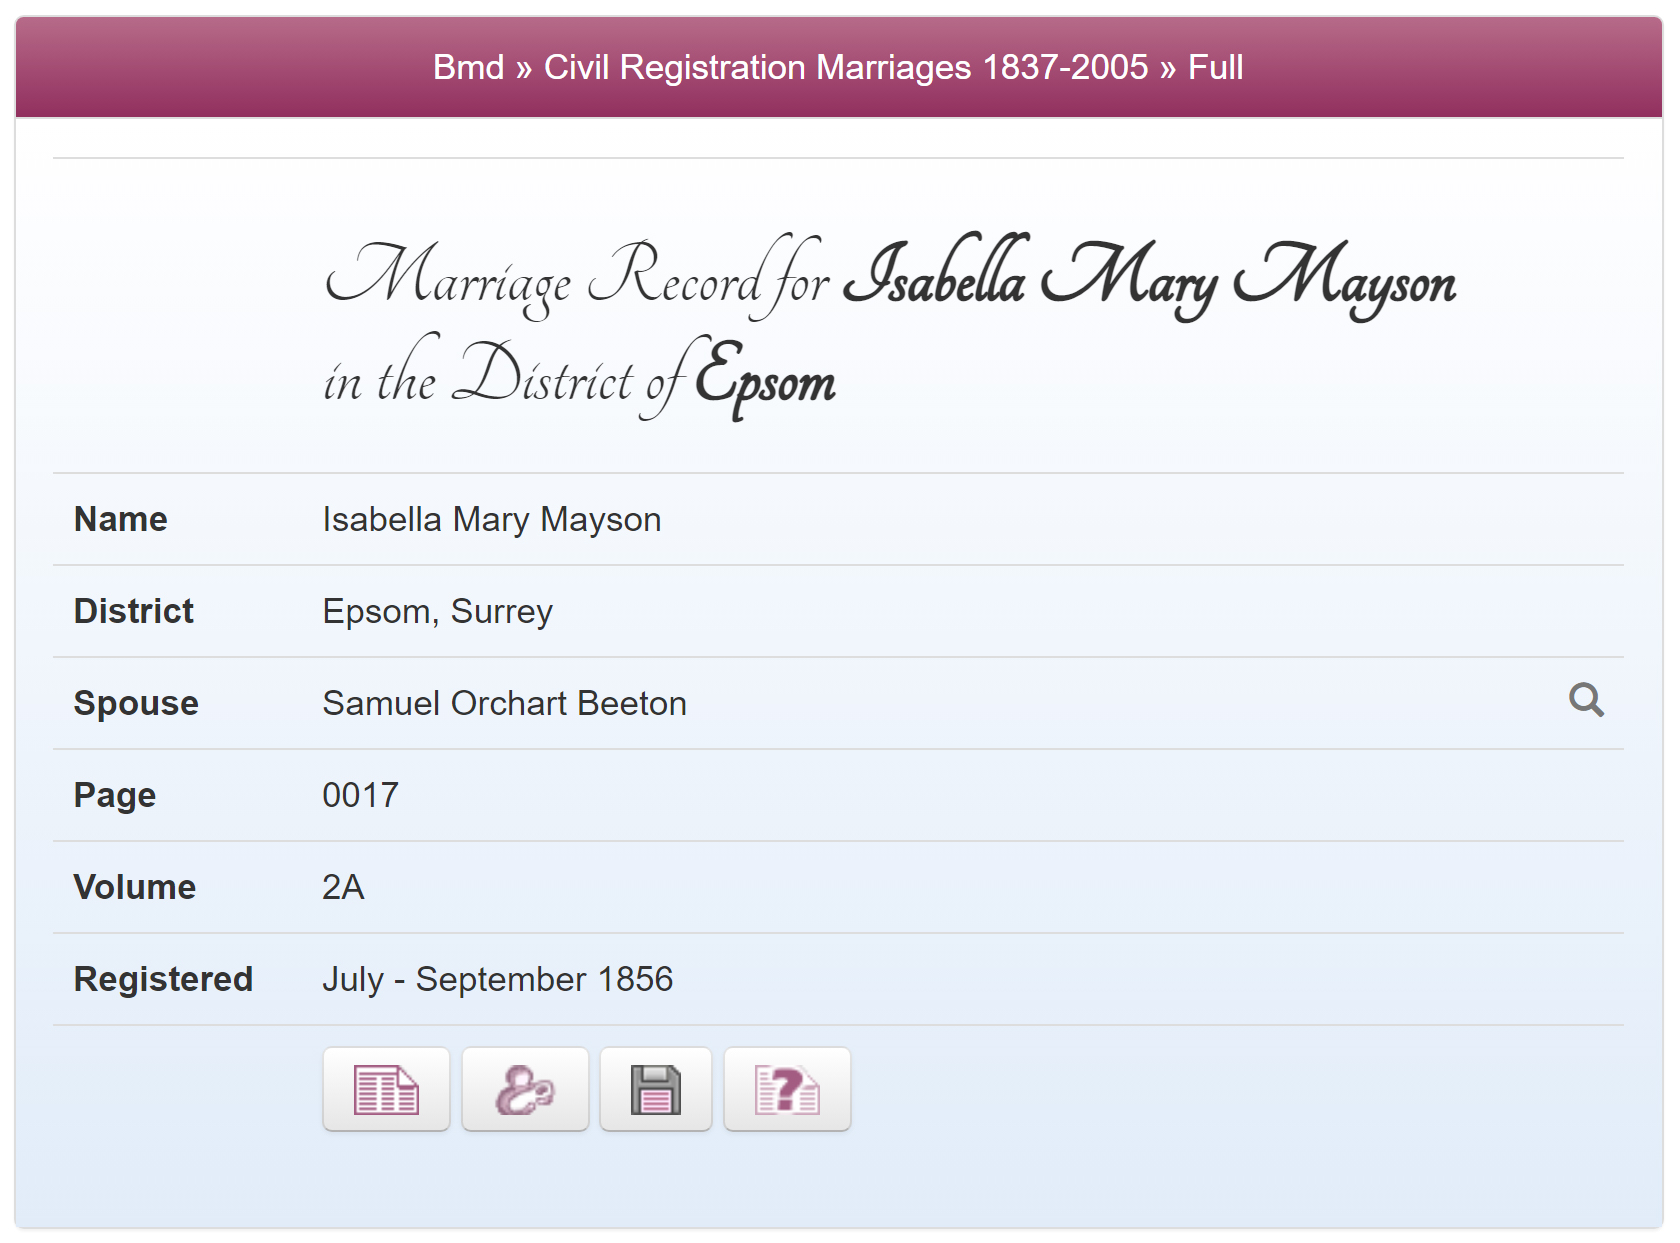 Finding a marriage using TheGenealogist's marriage transcripts